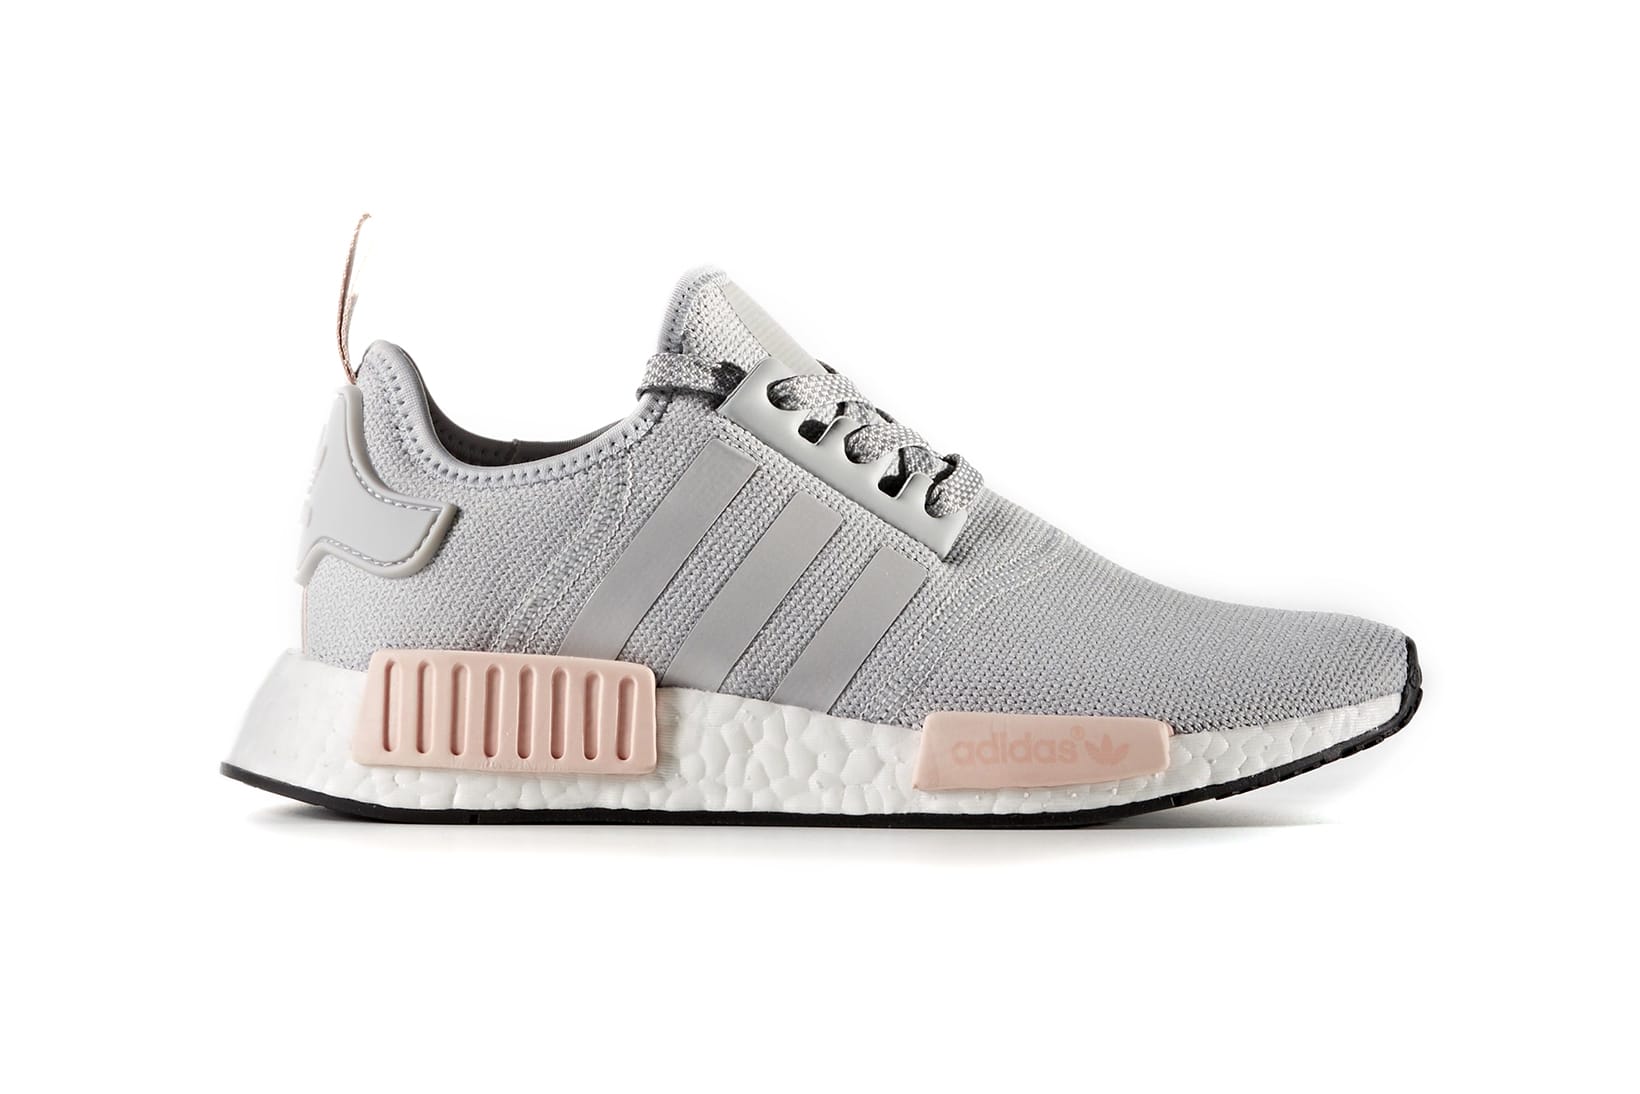 The Pink and Grey adidas NMDs Are 